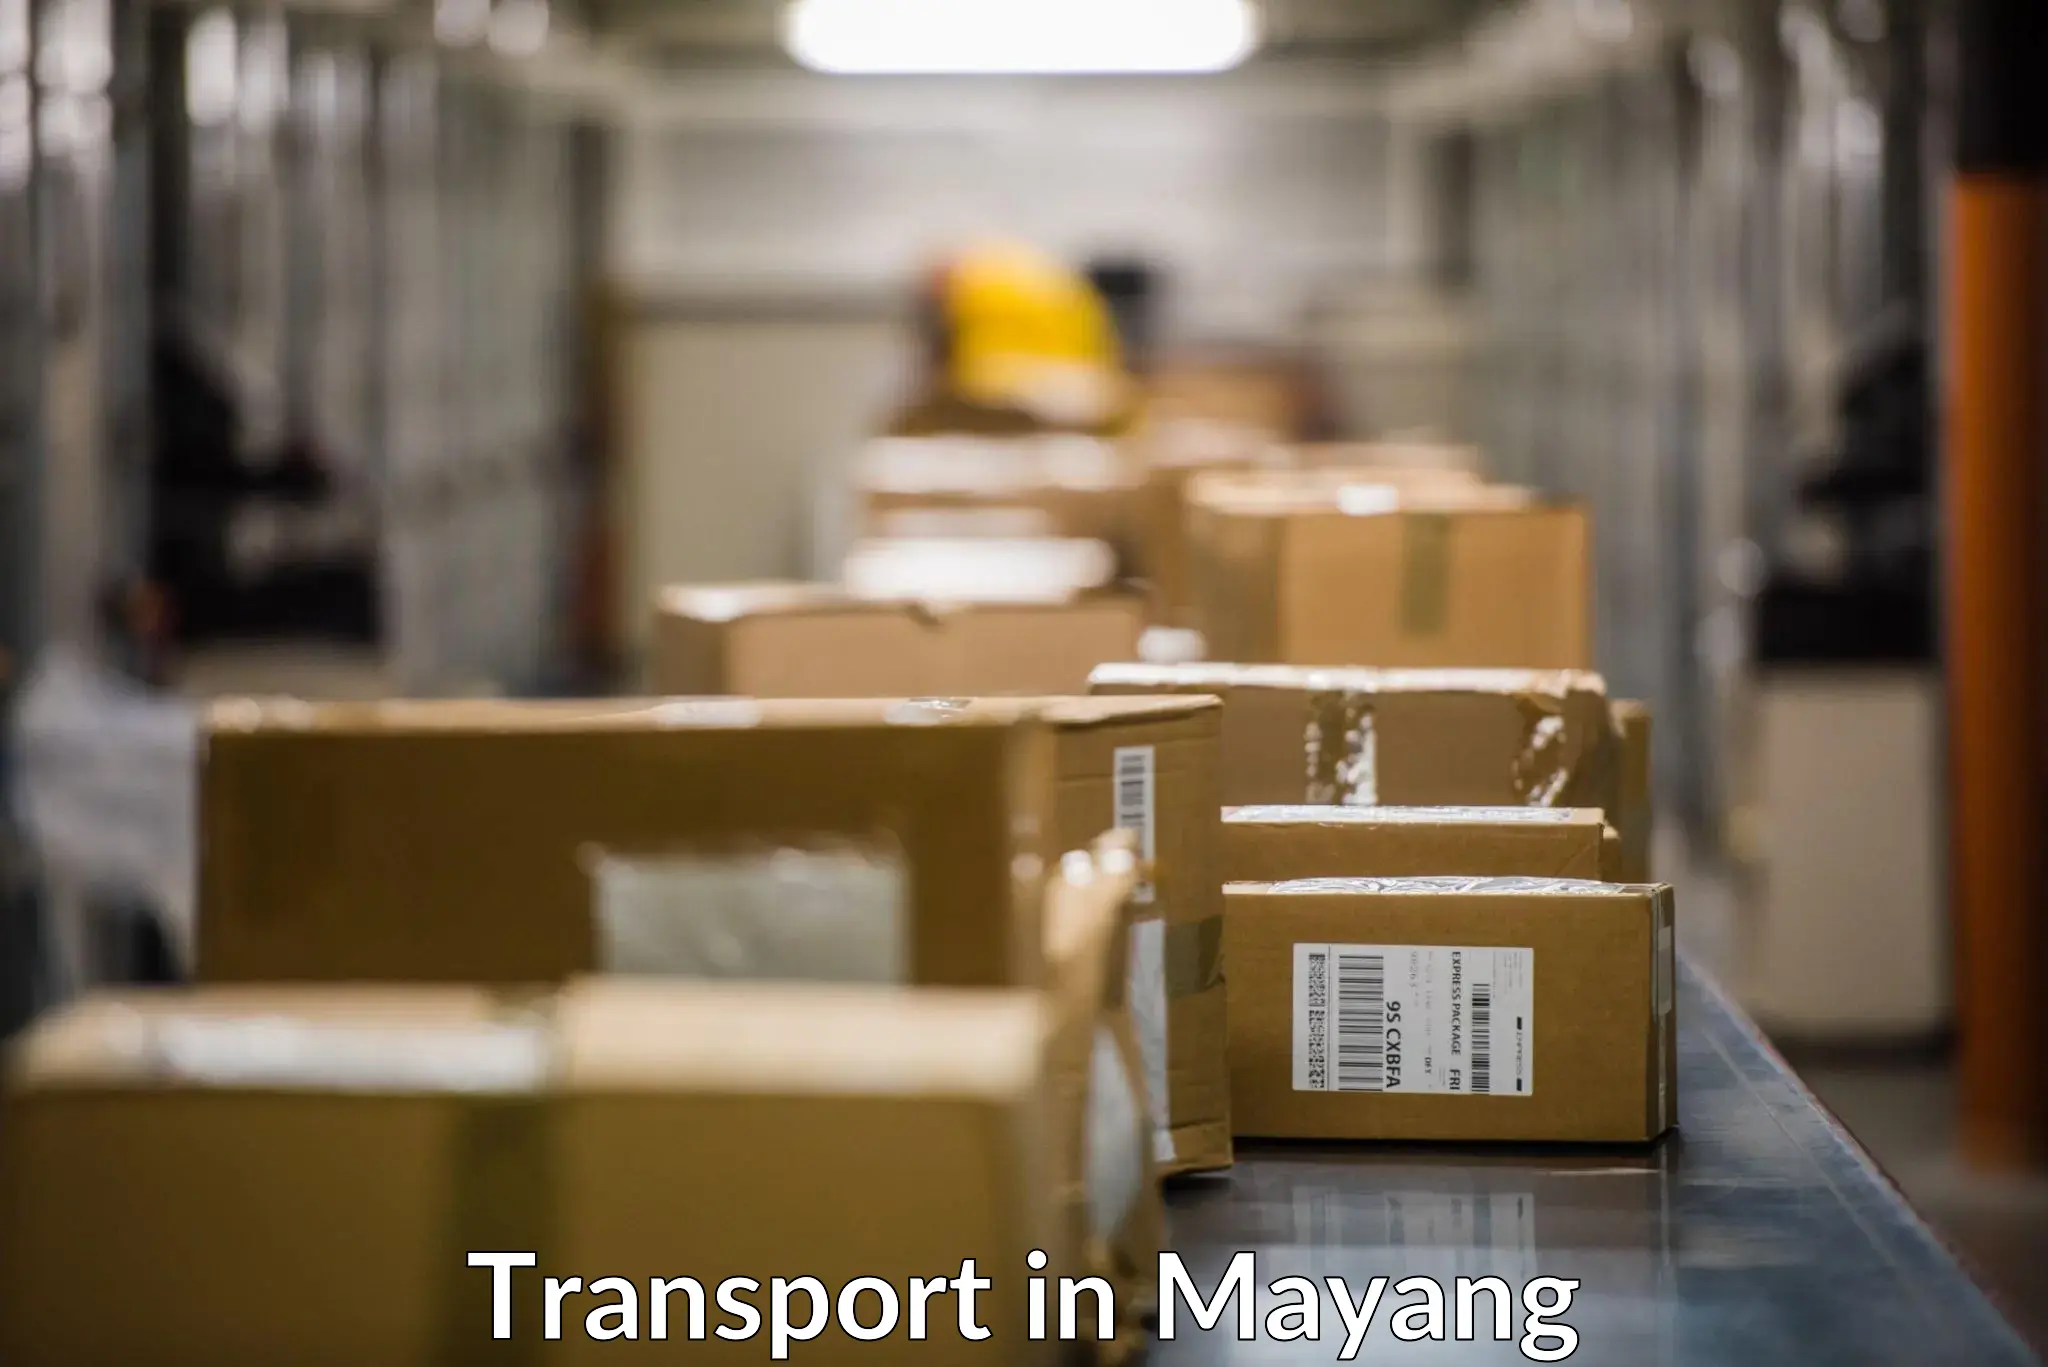 Online transport booking in Mayang